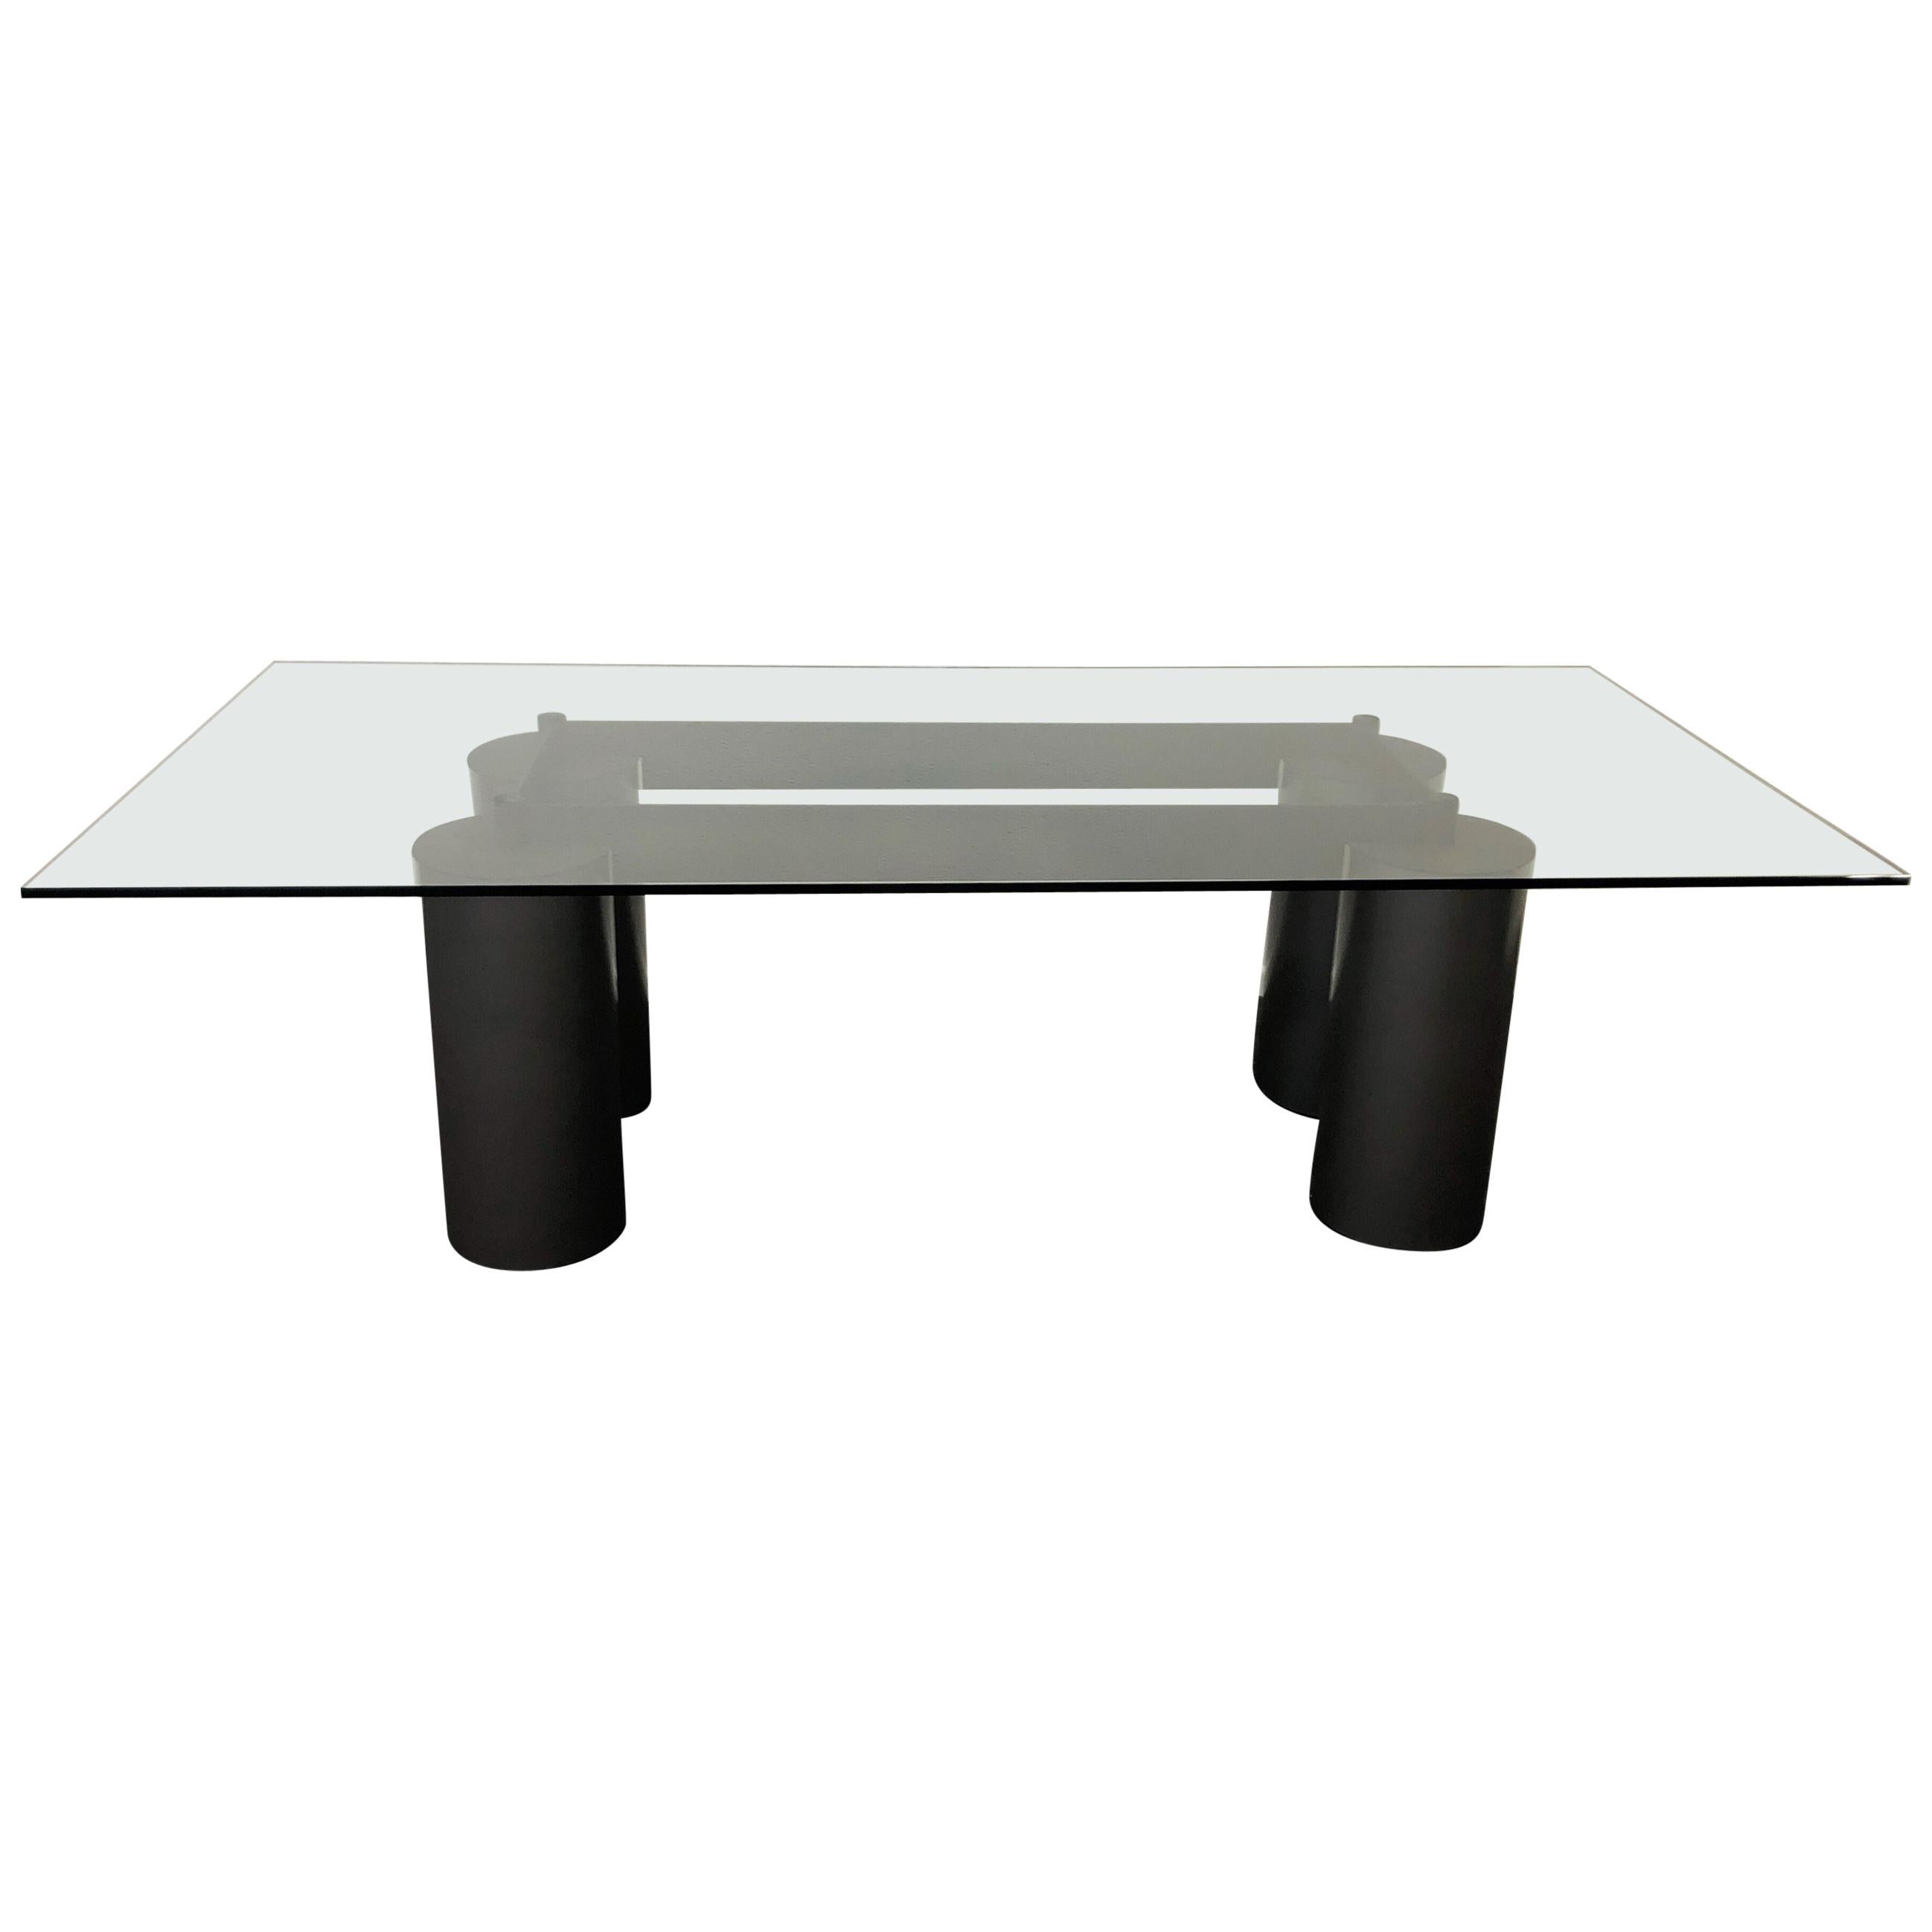 Italian Glass and Steel Dining Table by Vignelli for Acerbis